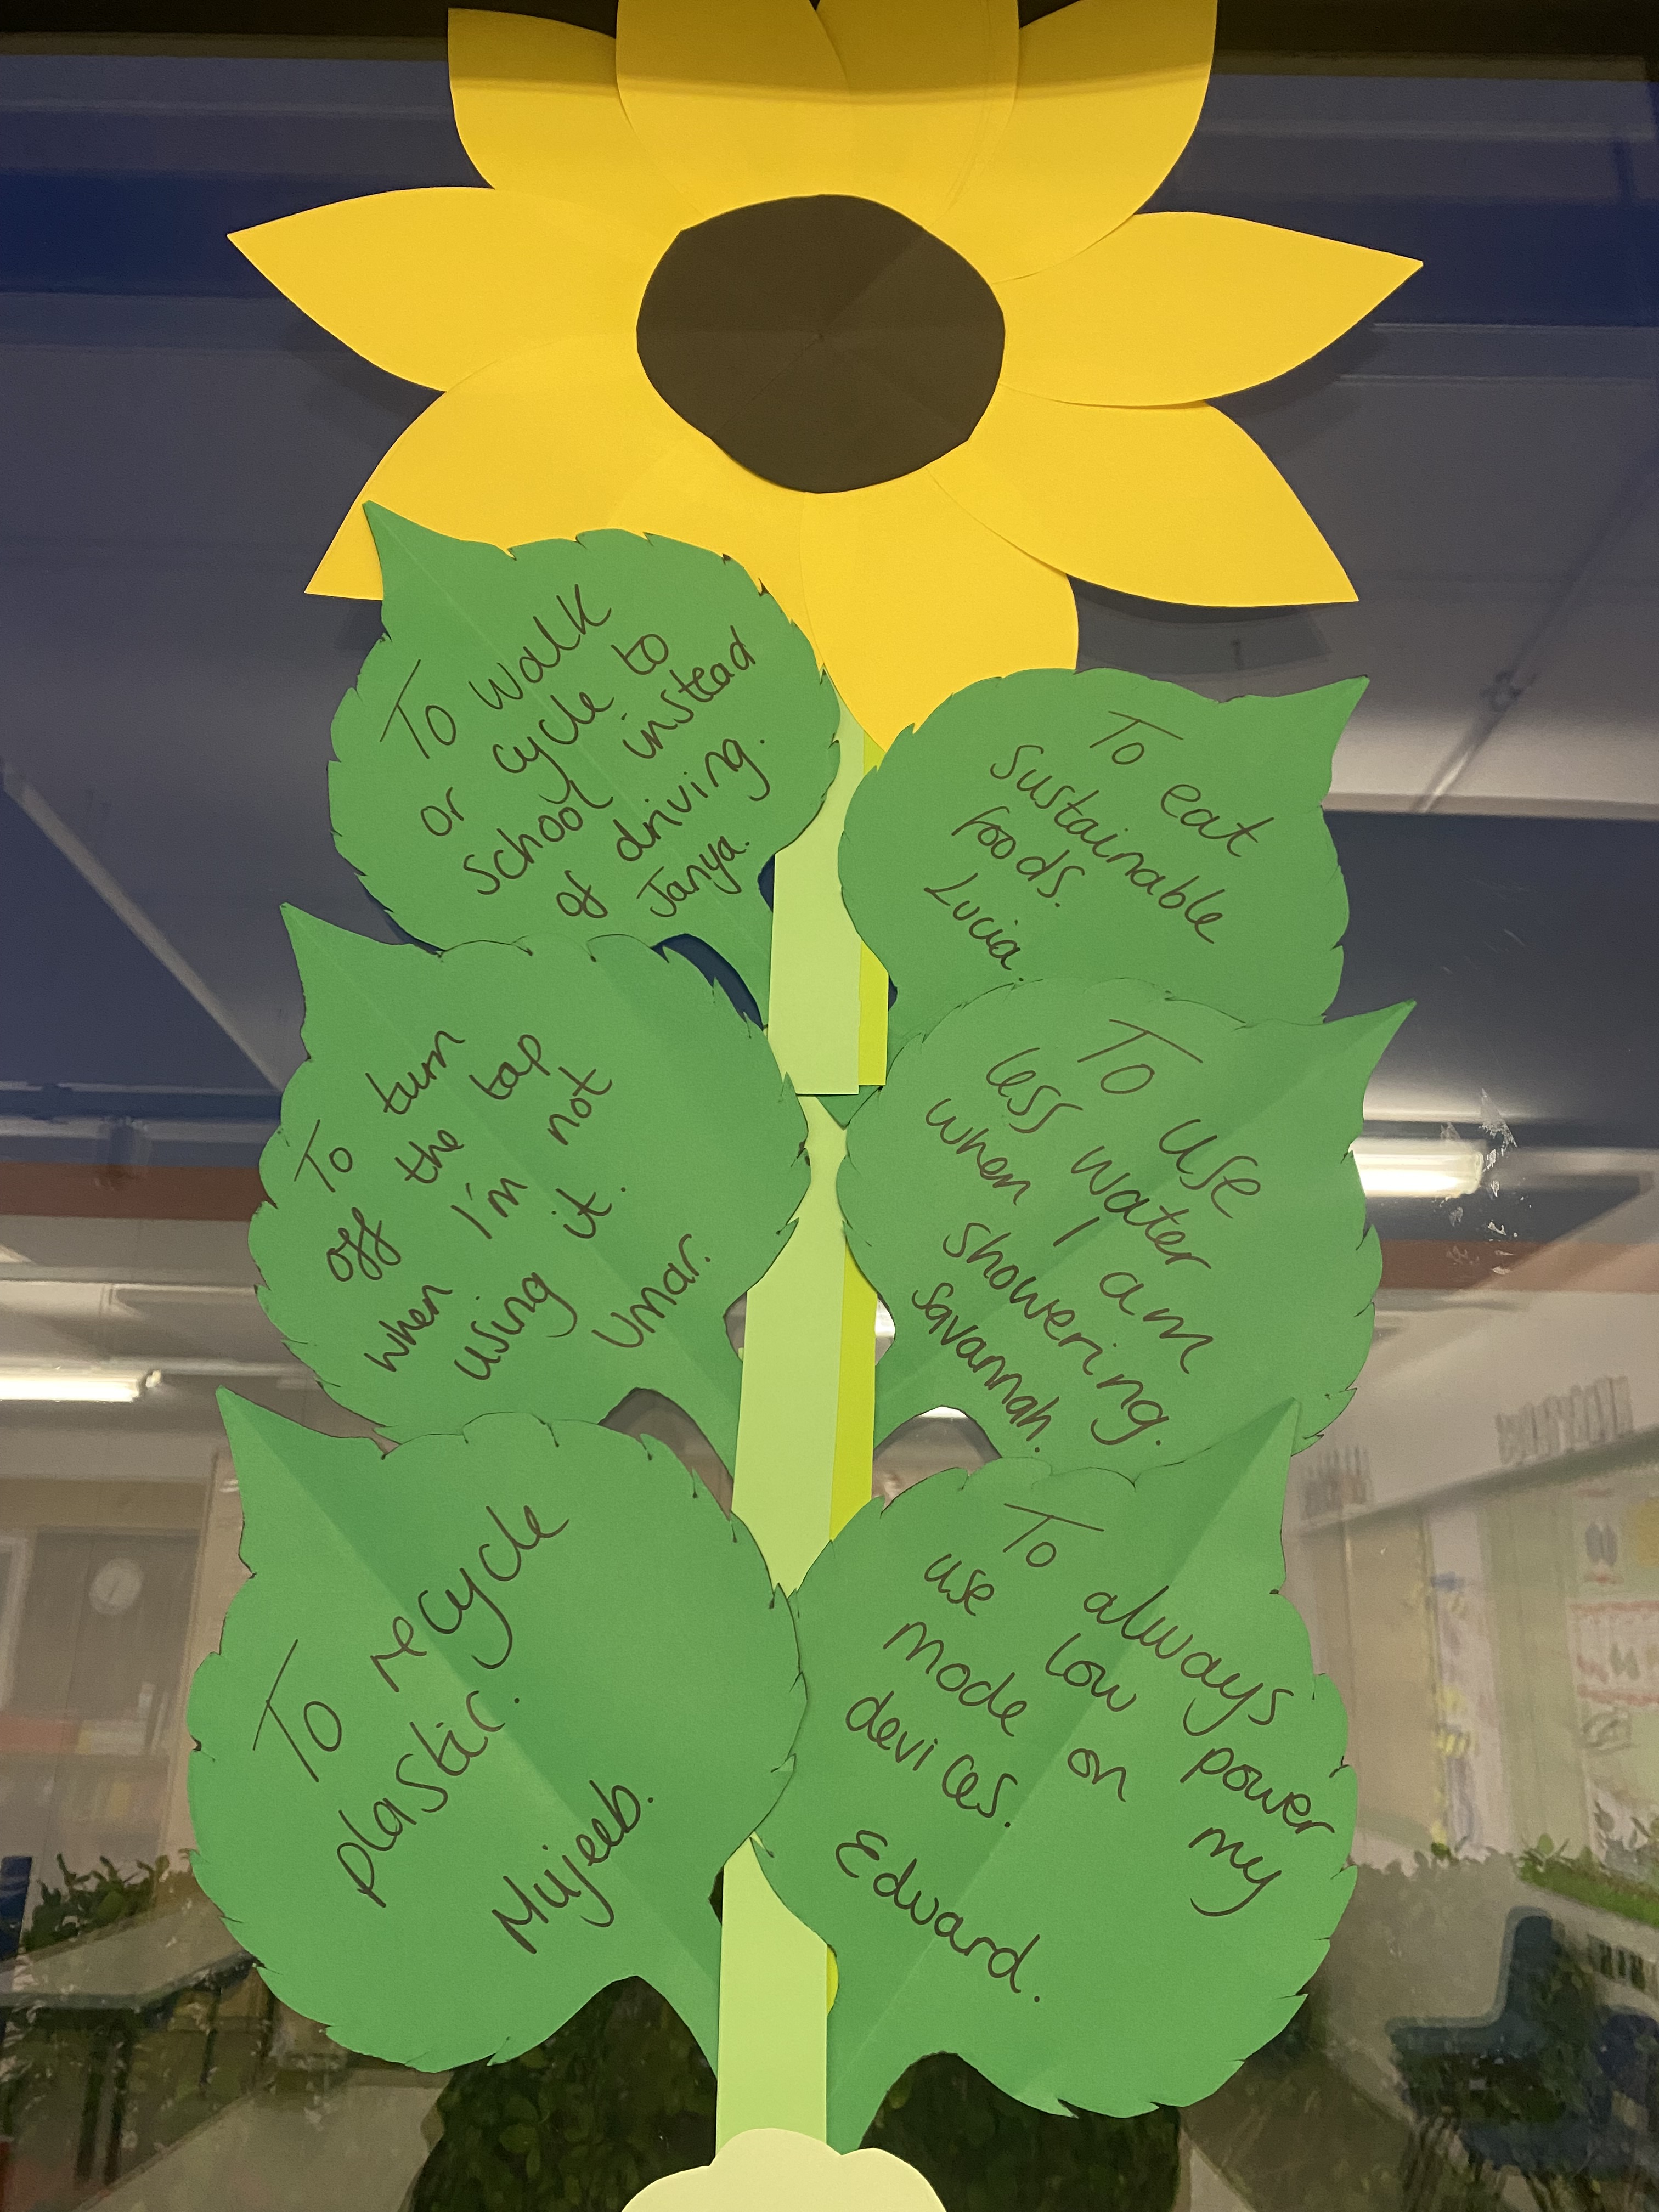 Elmgrove Primary Elmgrove 6w Care About Climate Change You Can Make A Difference If There Is Anything Which You See That You Do Not Feel Is Fair You Can Help